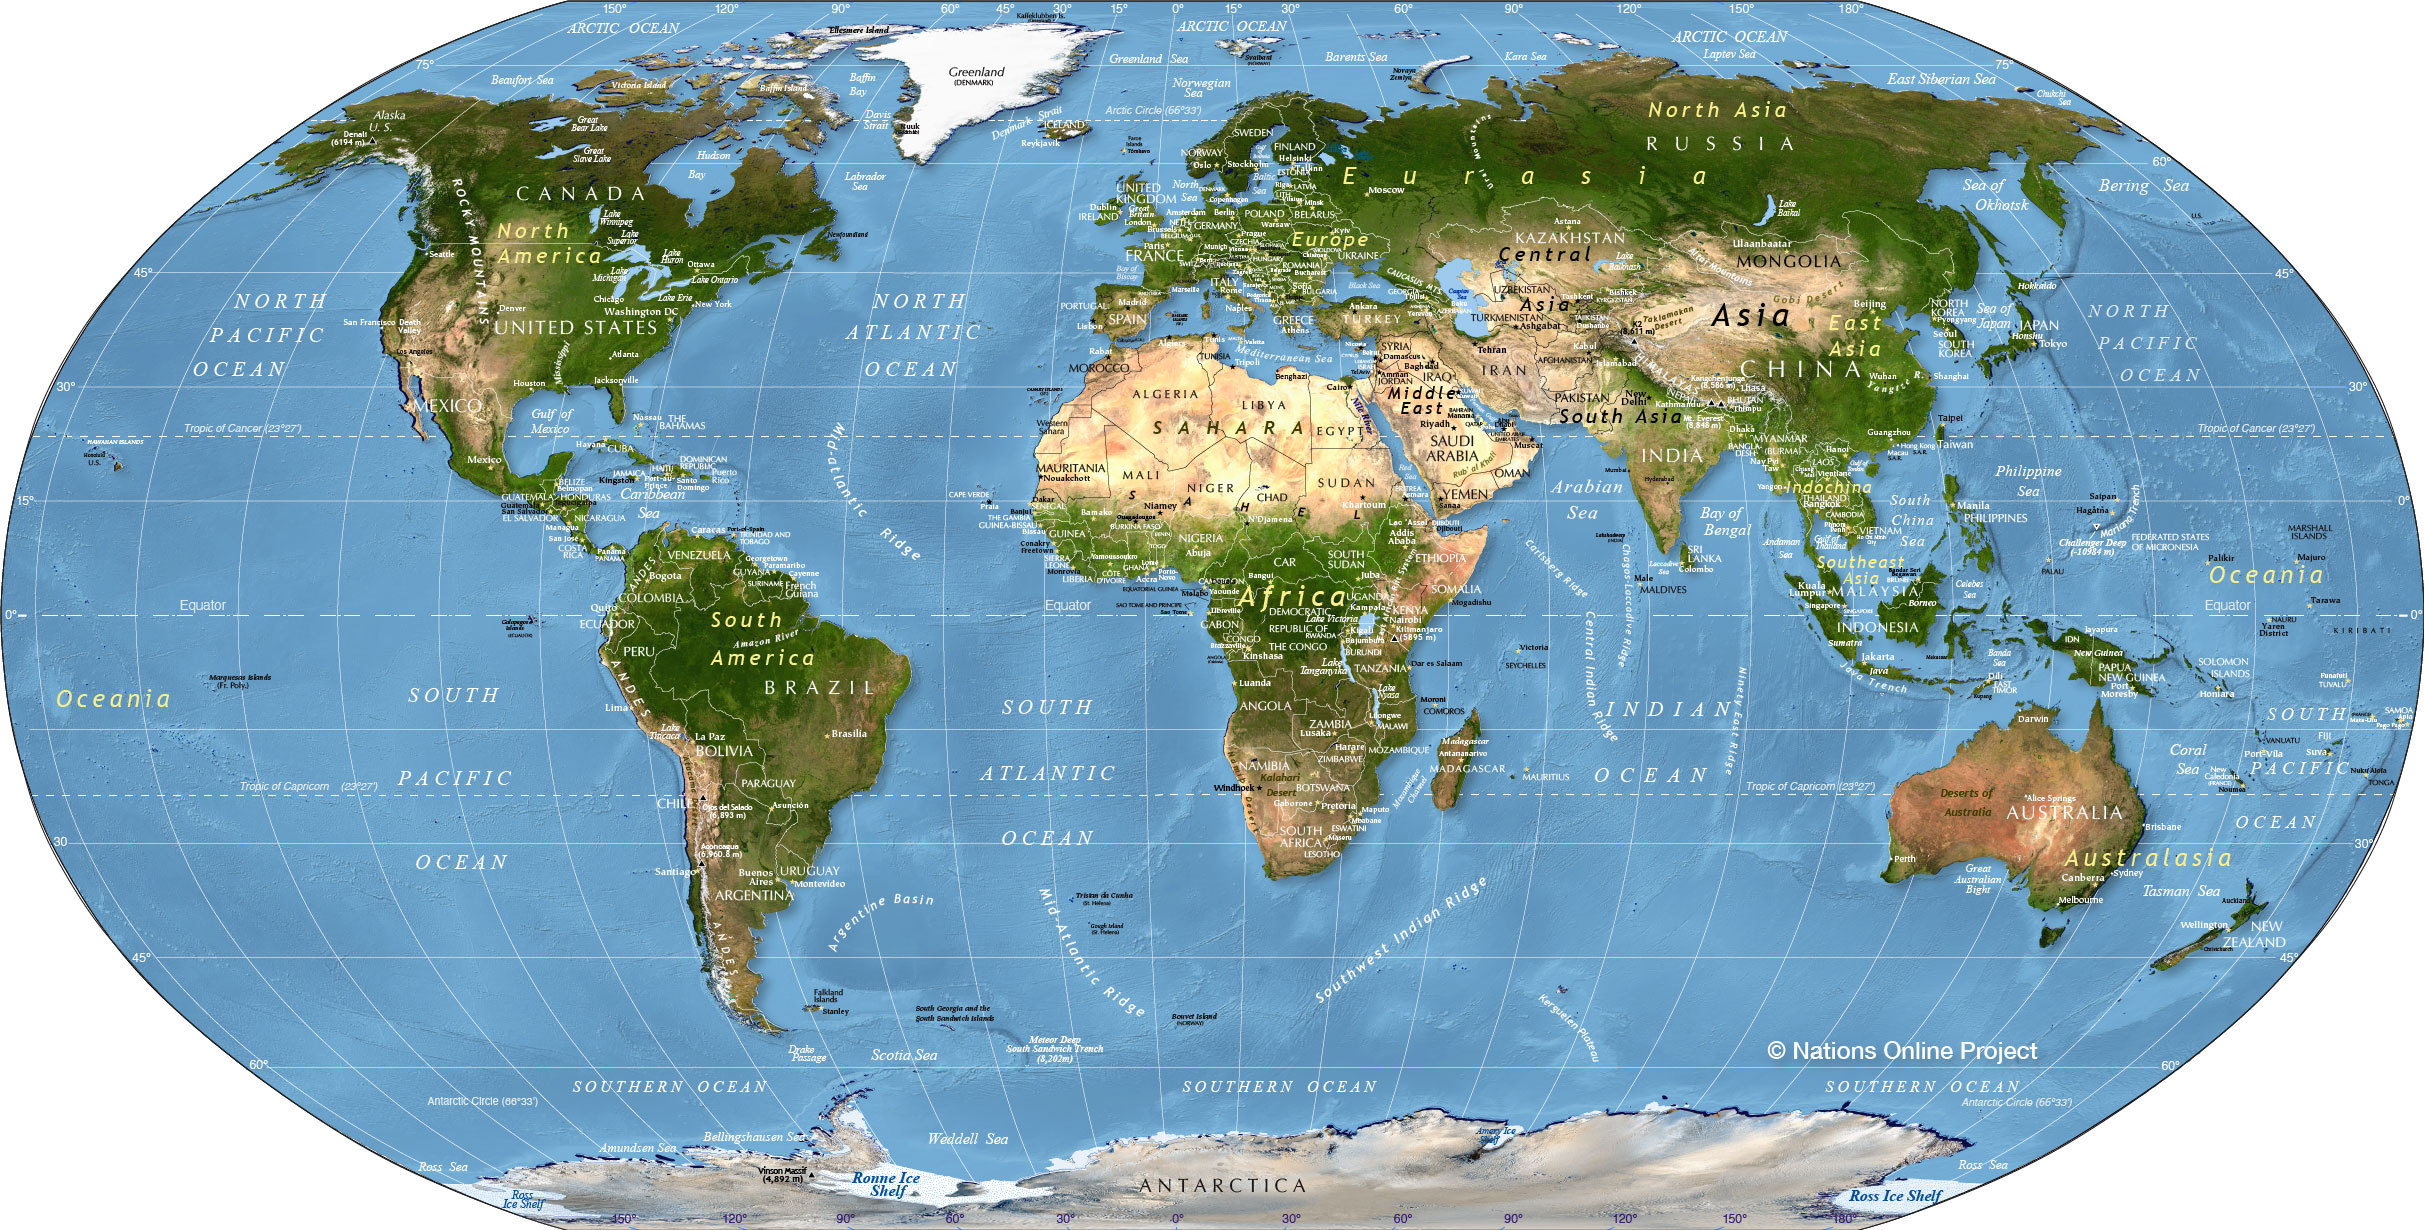 World Map - A Physical Map of the World - Nations Online ...
